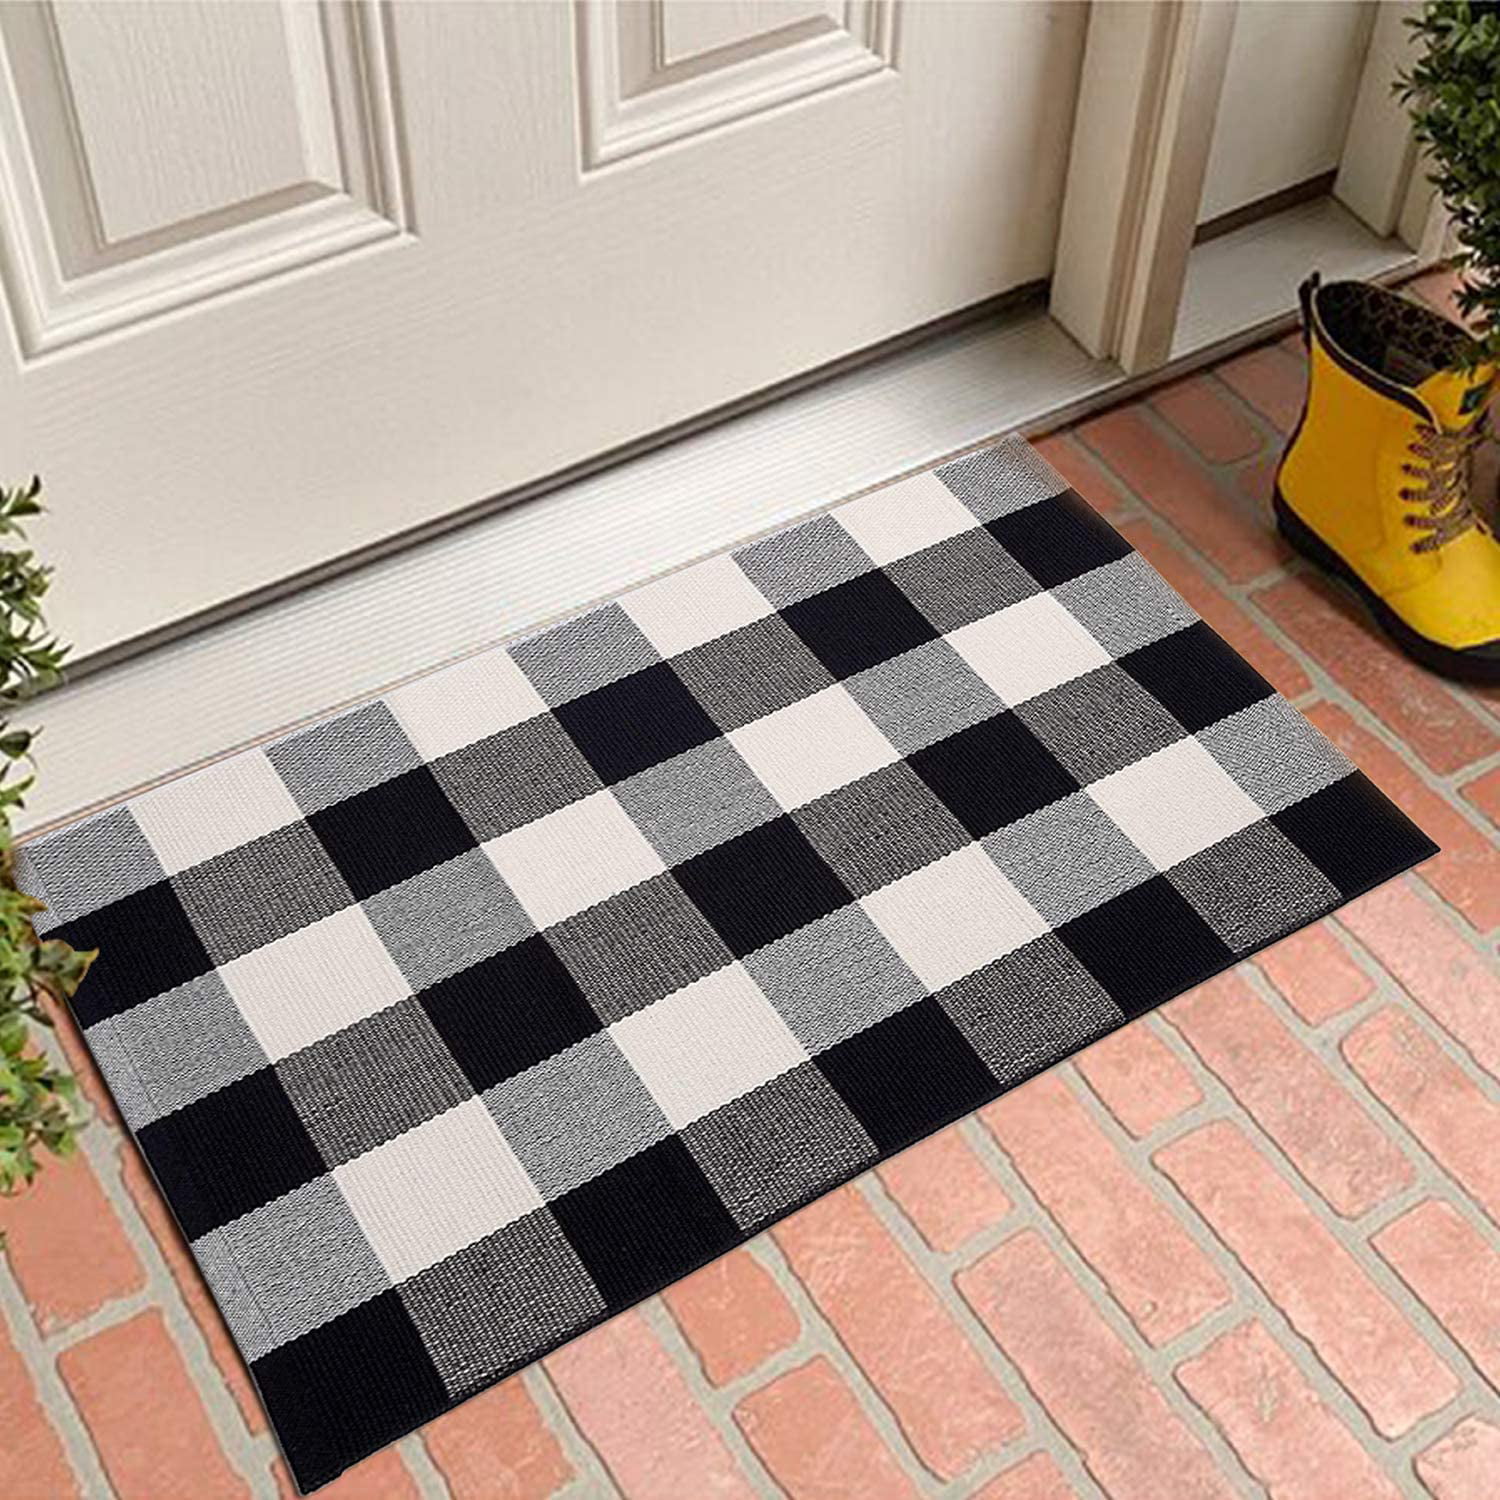 Collive Cotton Woven Striped Front Doormat Washable Indoor Door Mat for Farmhouse Porch Layered Kitchen Bathroom Laundry Room Black/White Outdoor Rug Runner 24'' x 51'' 